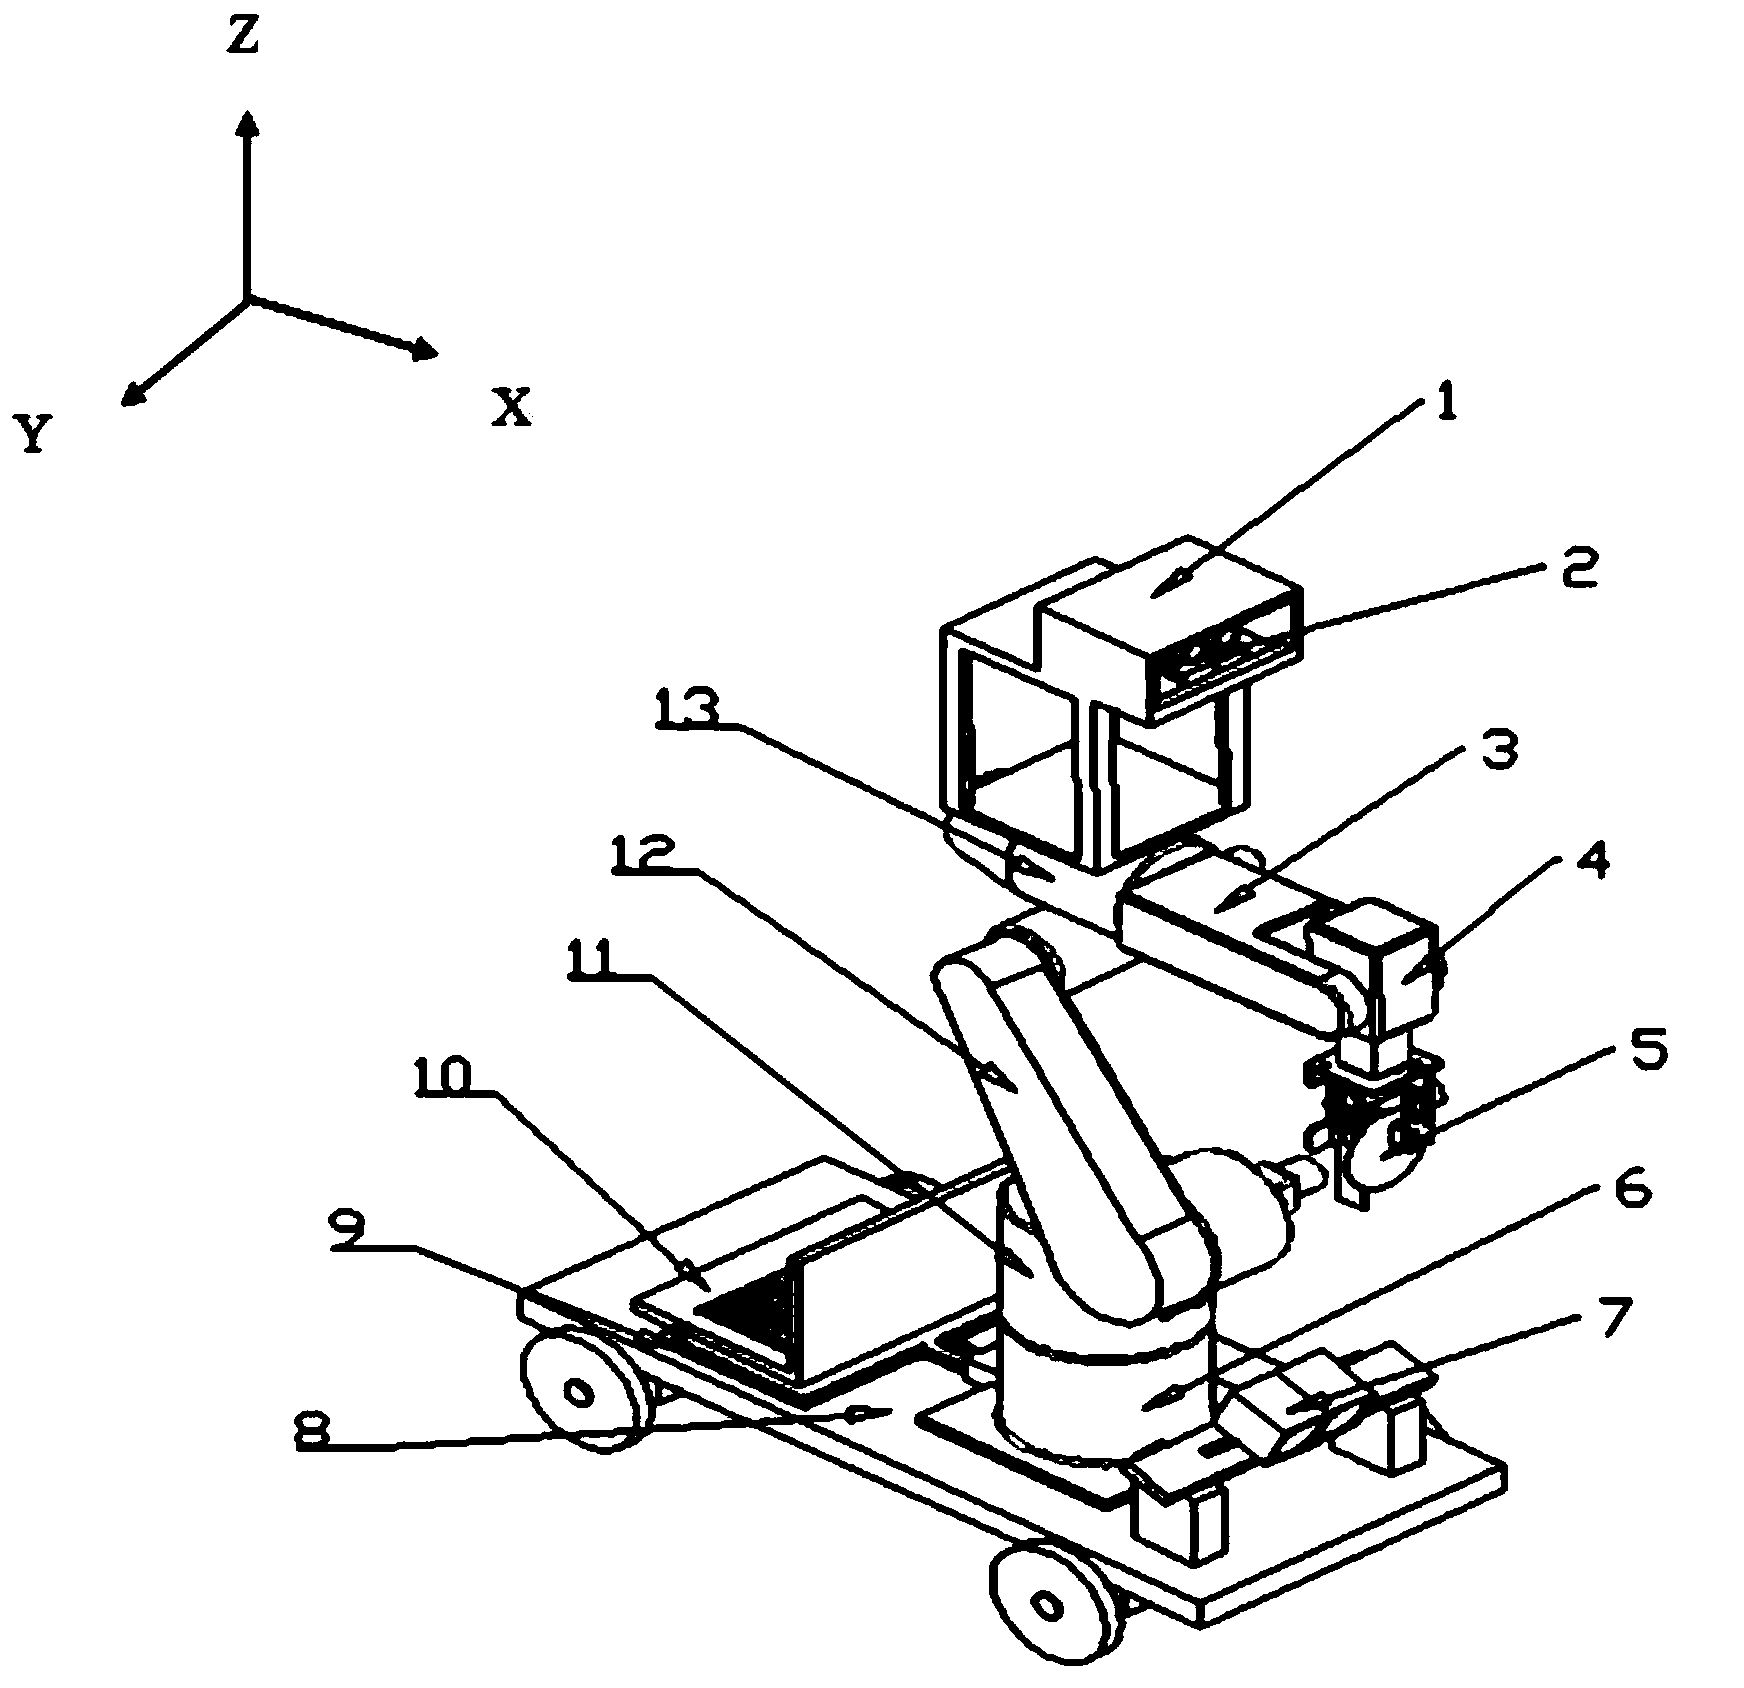 Virtual robot and real robot integration based picking system and method